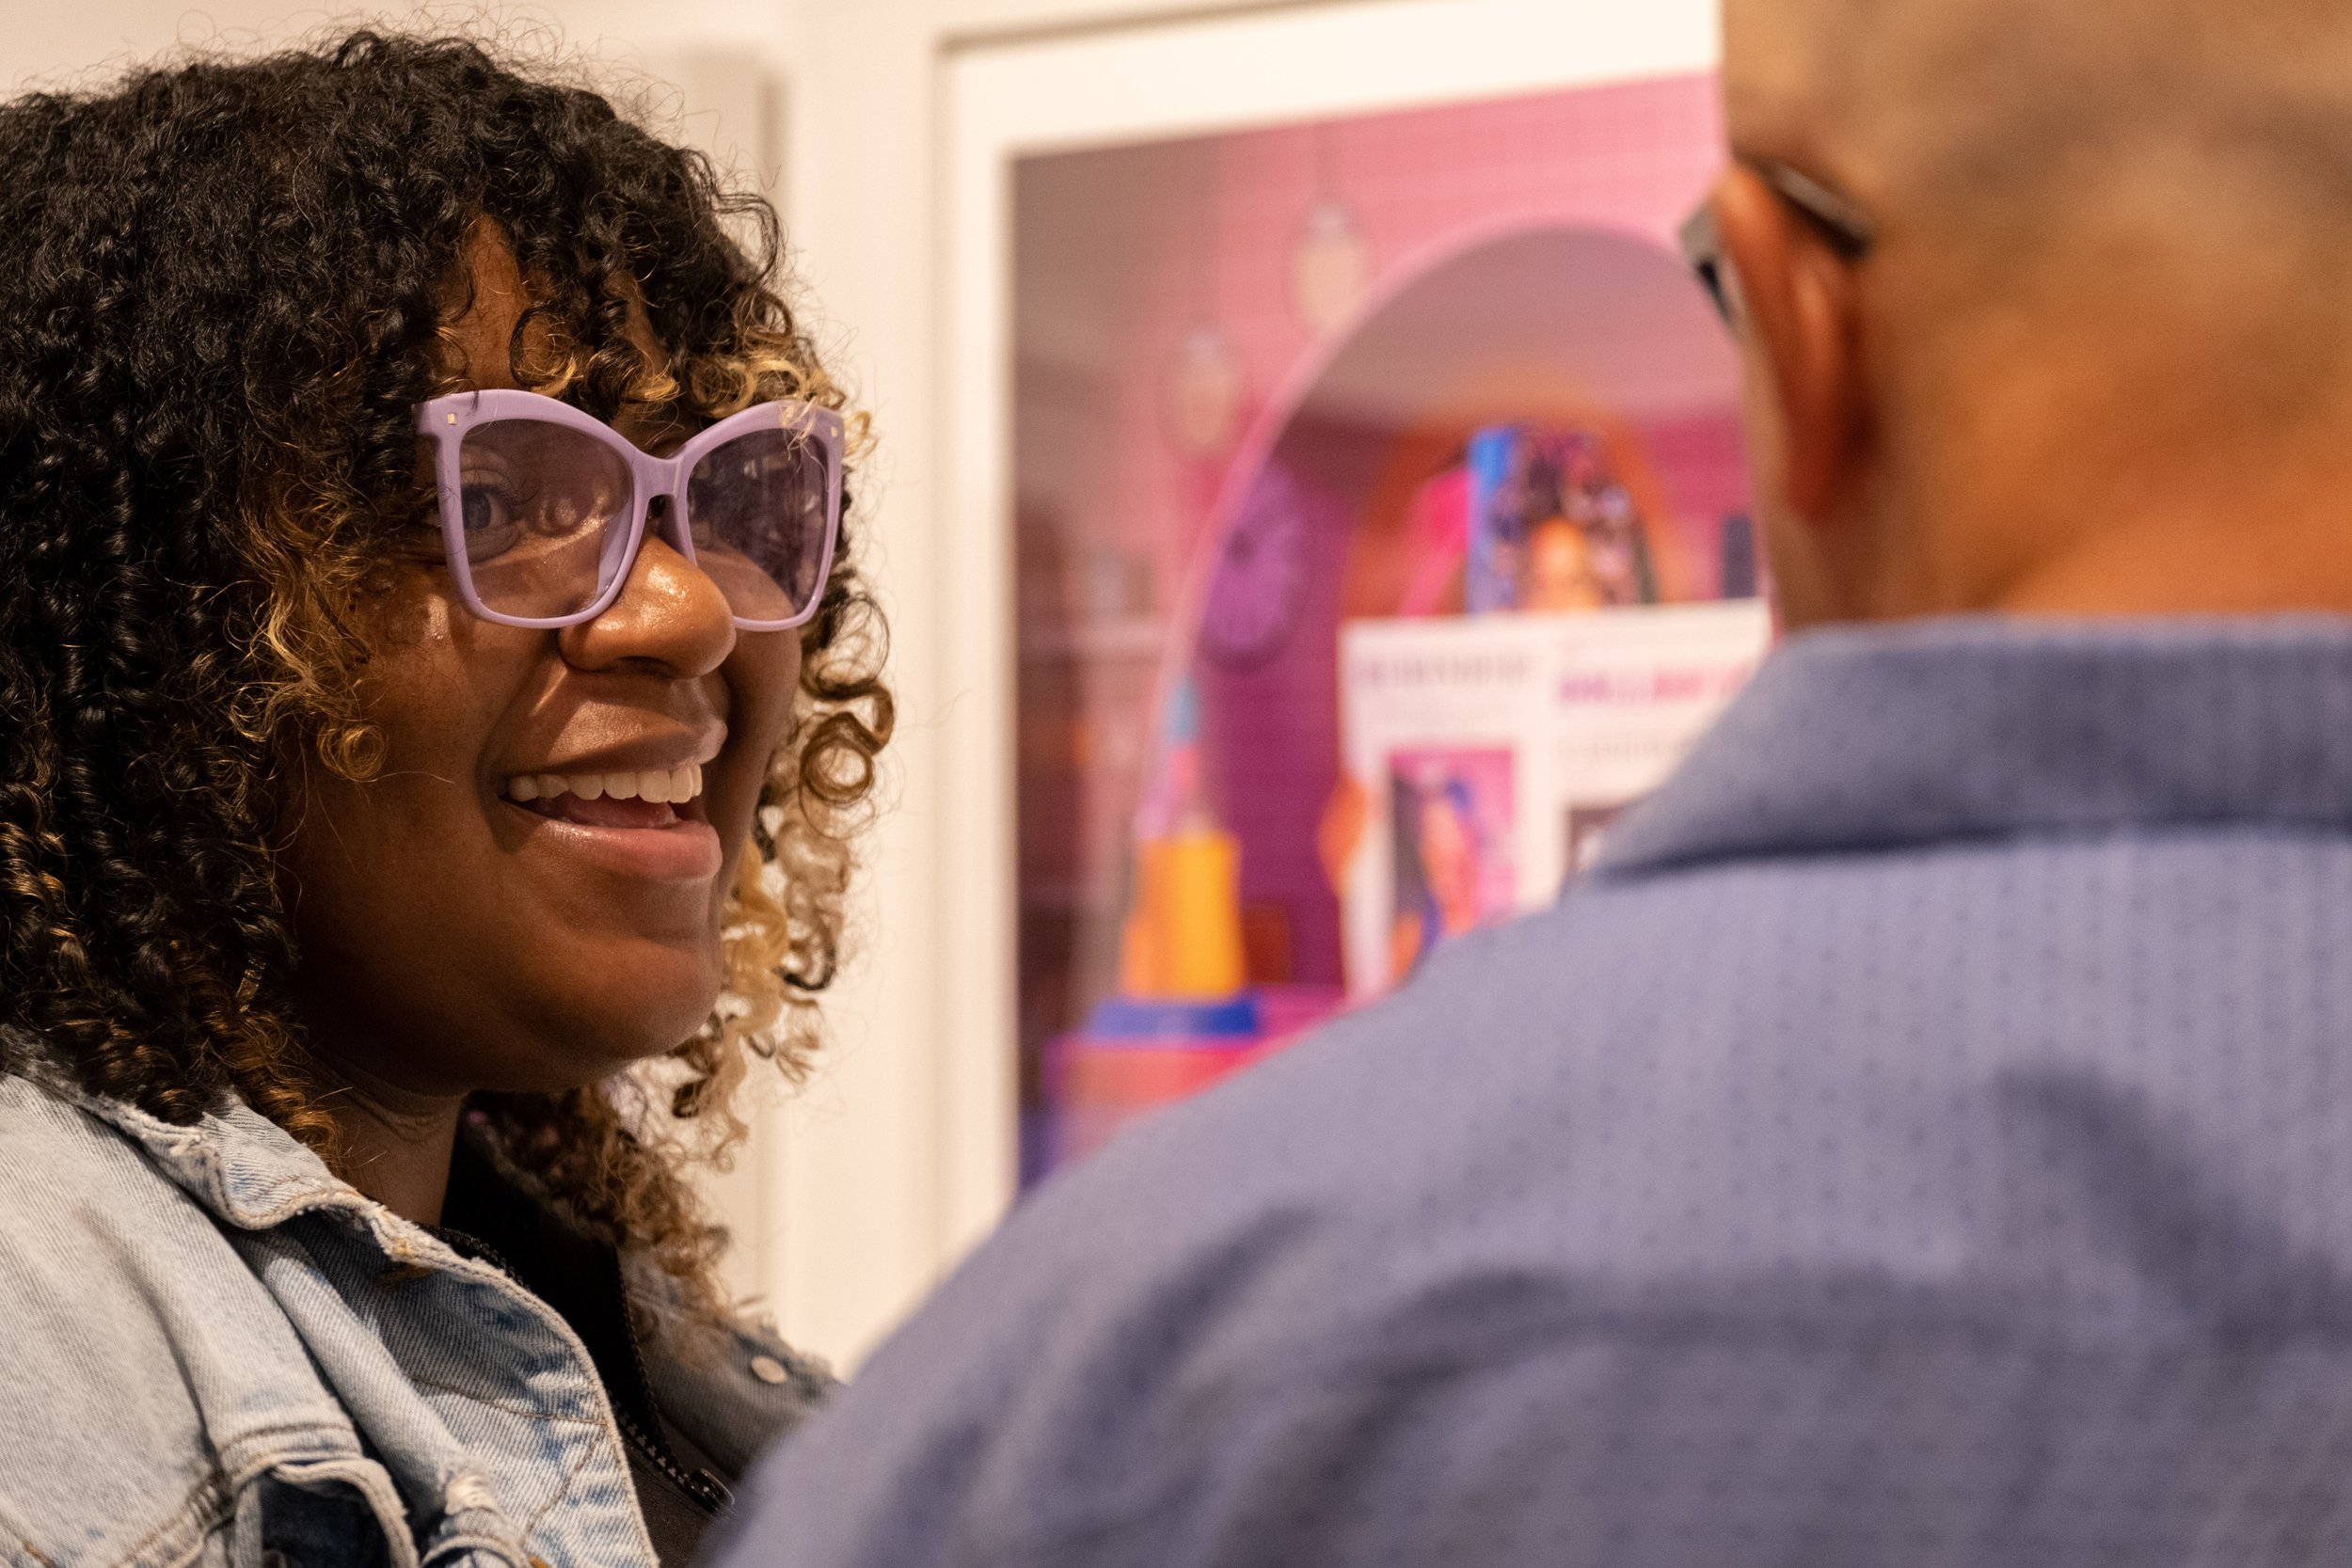  Stephanie Price, digital lab technician, chats with photography student Robert while standing in front of her work displayed in Drescher Hall, 2nd floor, at the Santa Monica College main campus in Santa Monica, Calif. at the opening reception of the